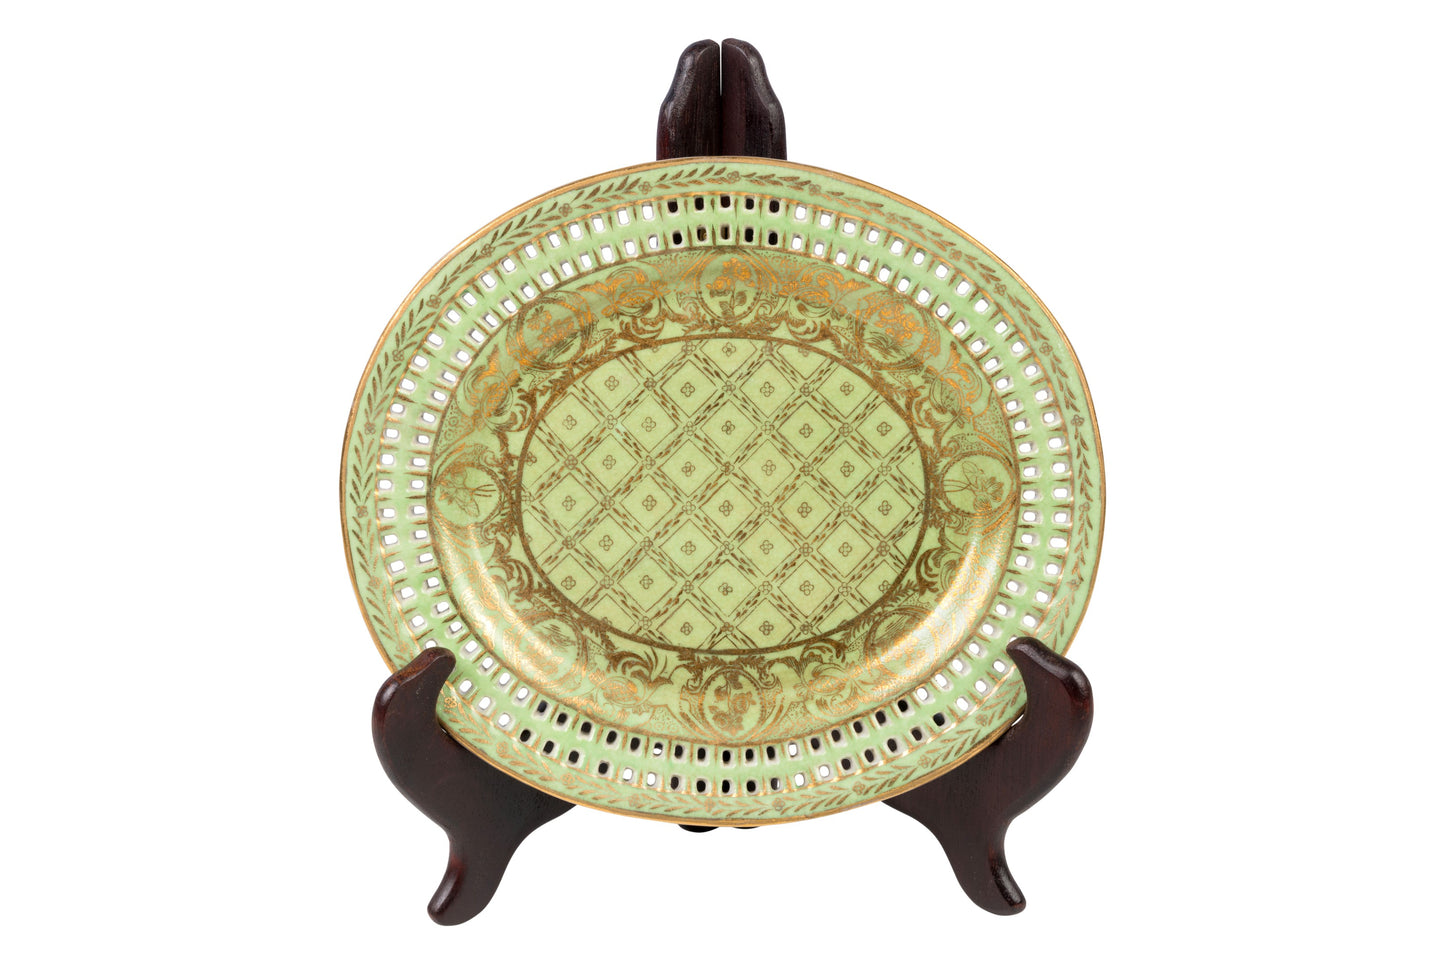 Green and Gold Cross Pattern Porcelain Oval Plate 9"x7"